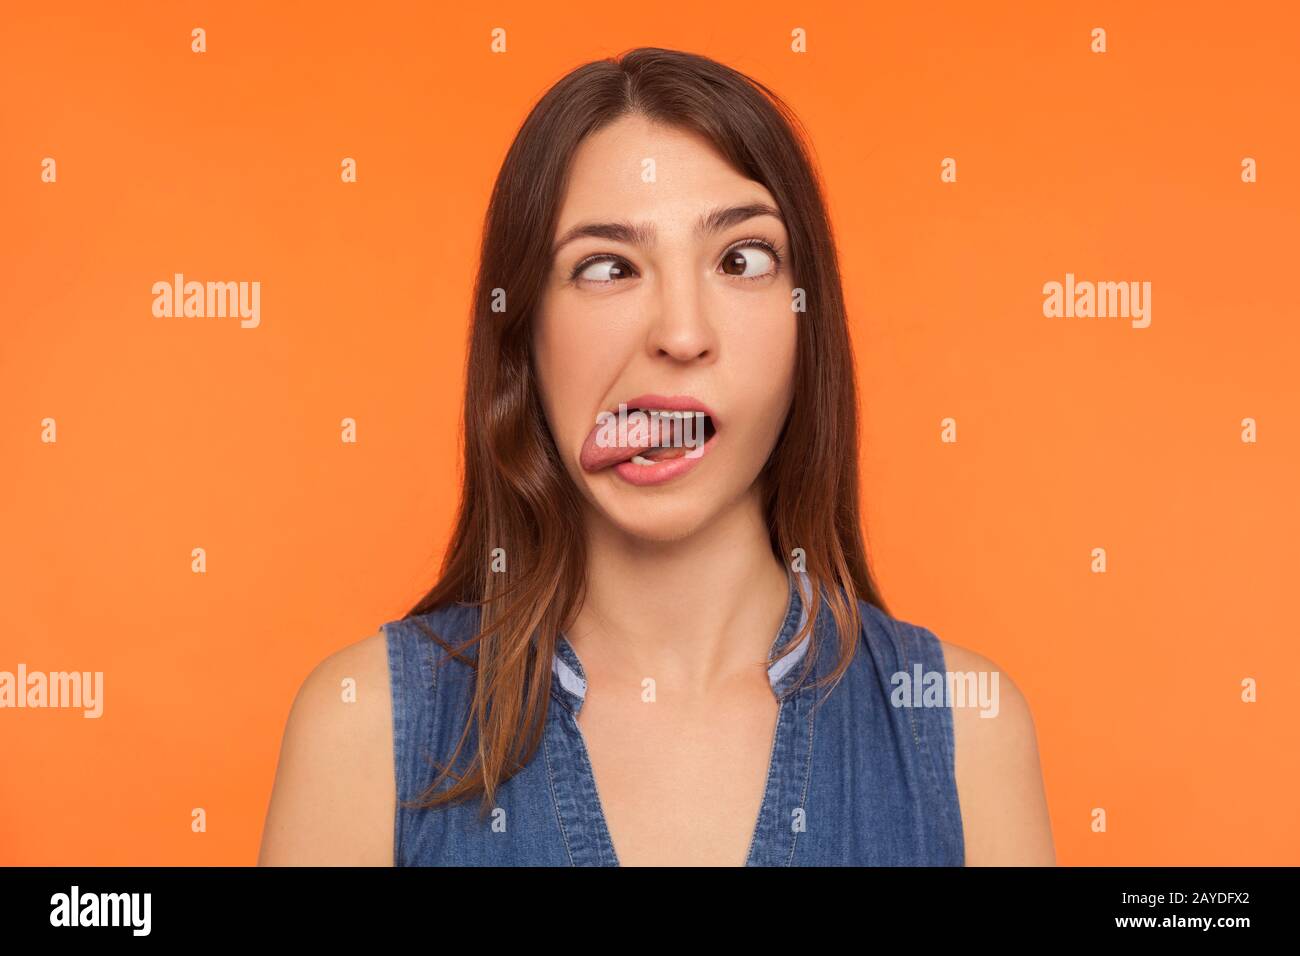 Closeup of silly dumb brunette woman demonstrating tongue and making stupid face with crossed eyes, idiotic expression, showing ridiculous grimace. in Stock Photo